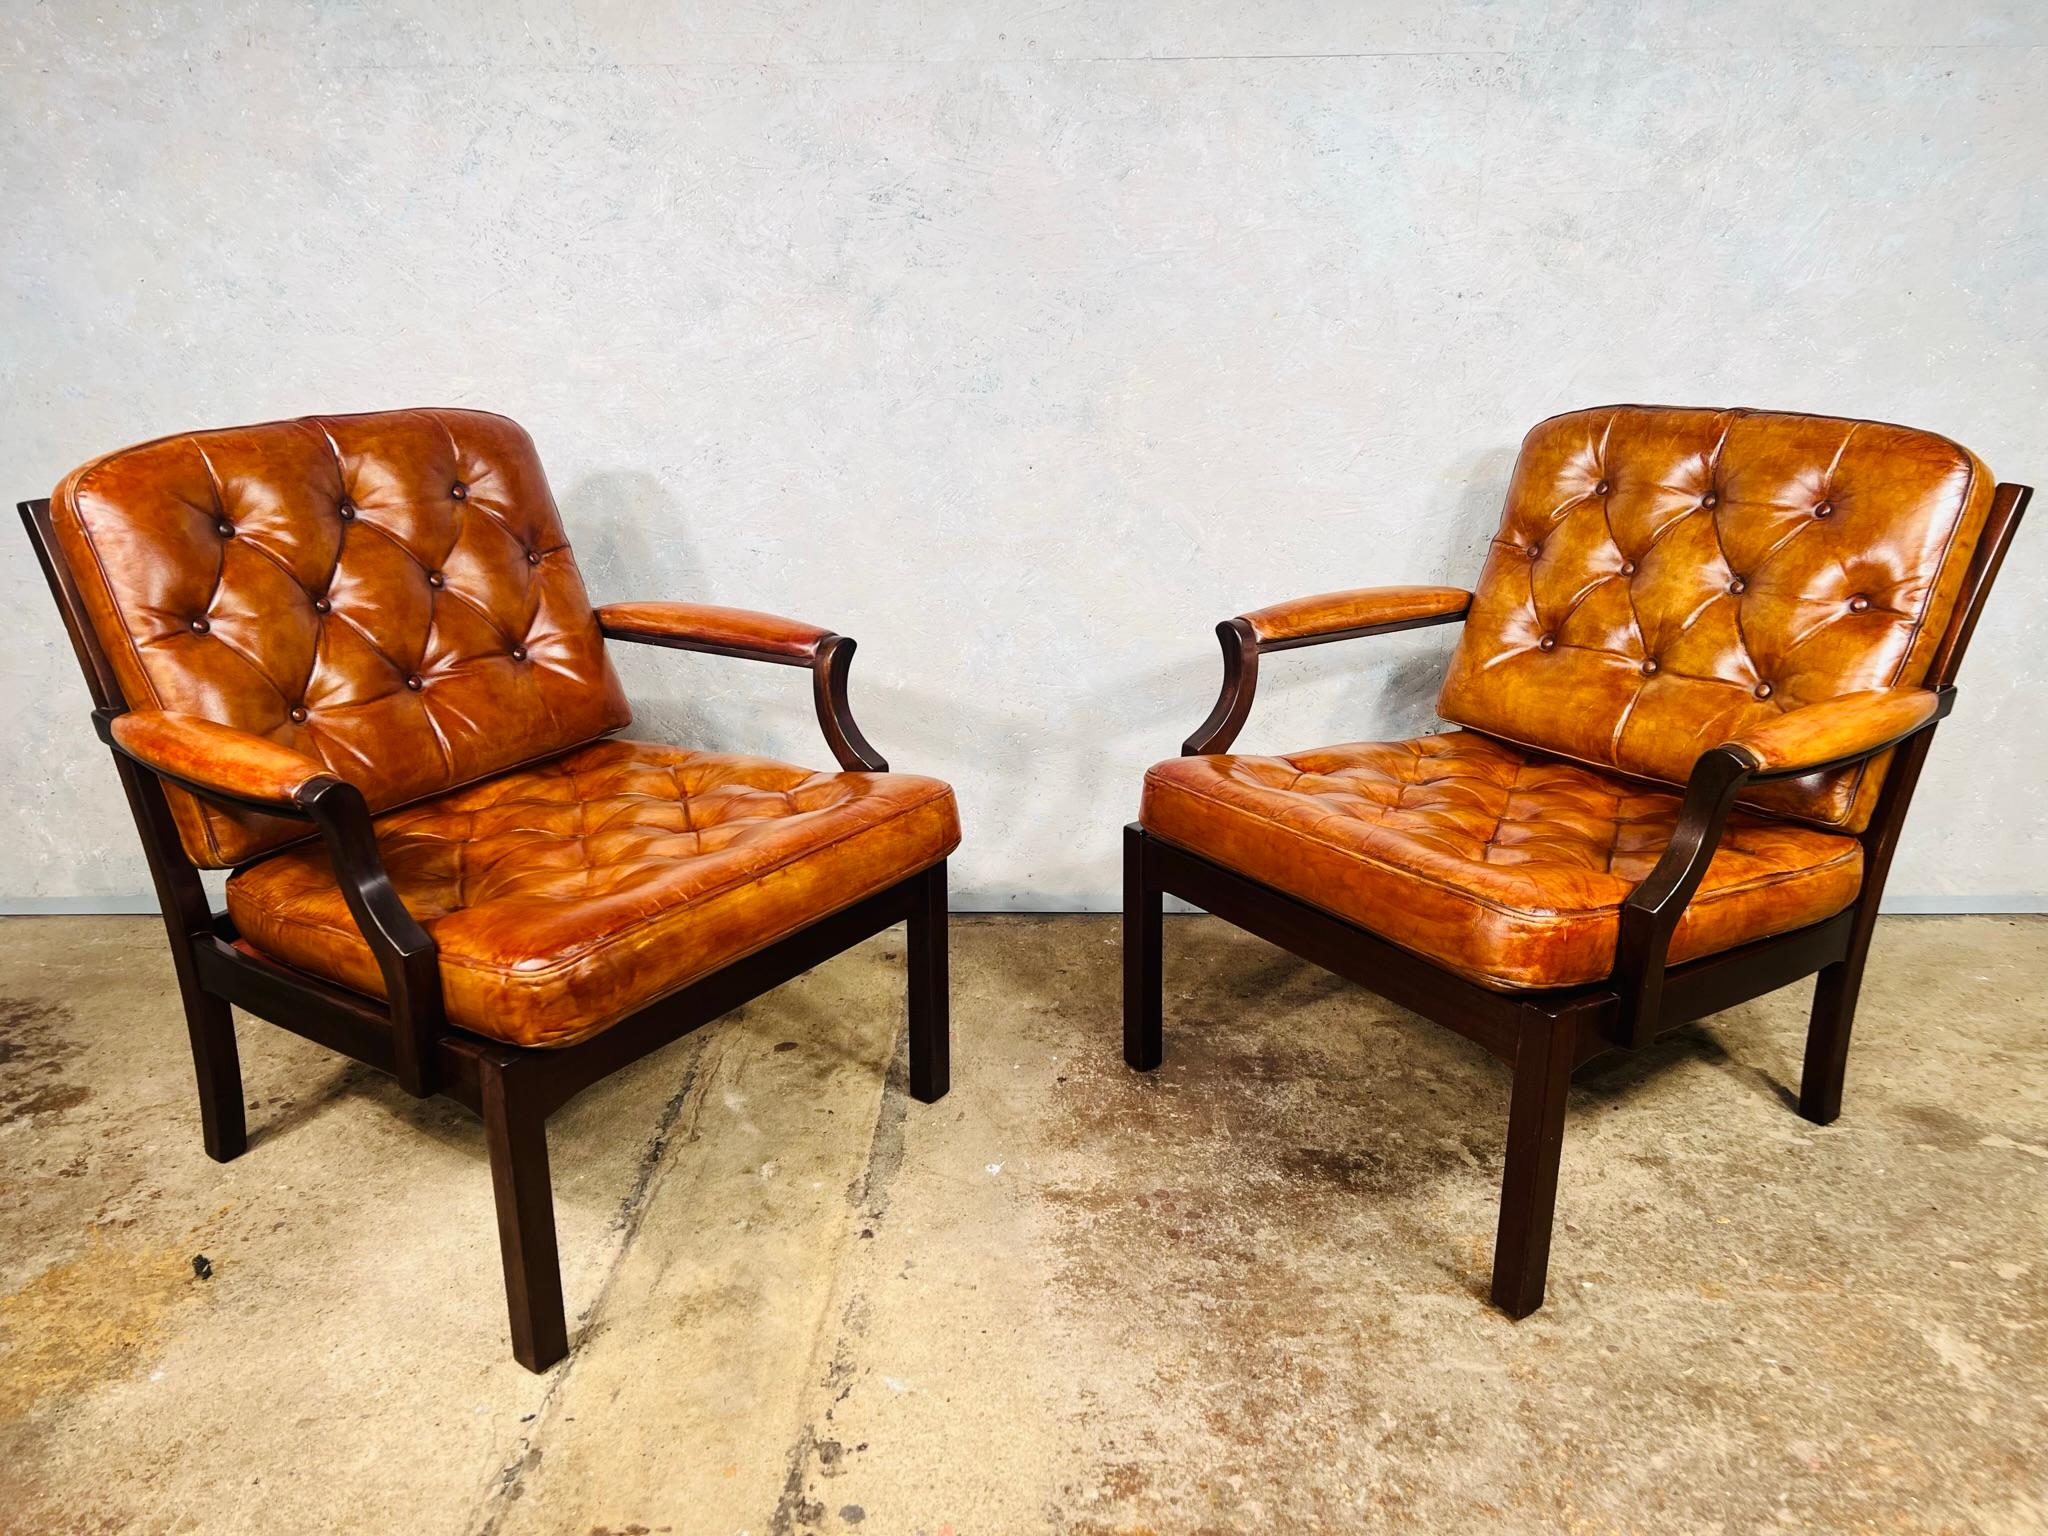 Elegant Pair of Vintage Danish Leather Armchairs Light Tan #734 In Good Condition For Sale In Lewes, GB